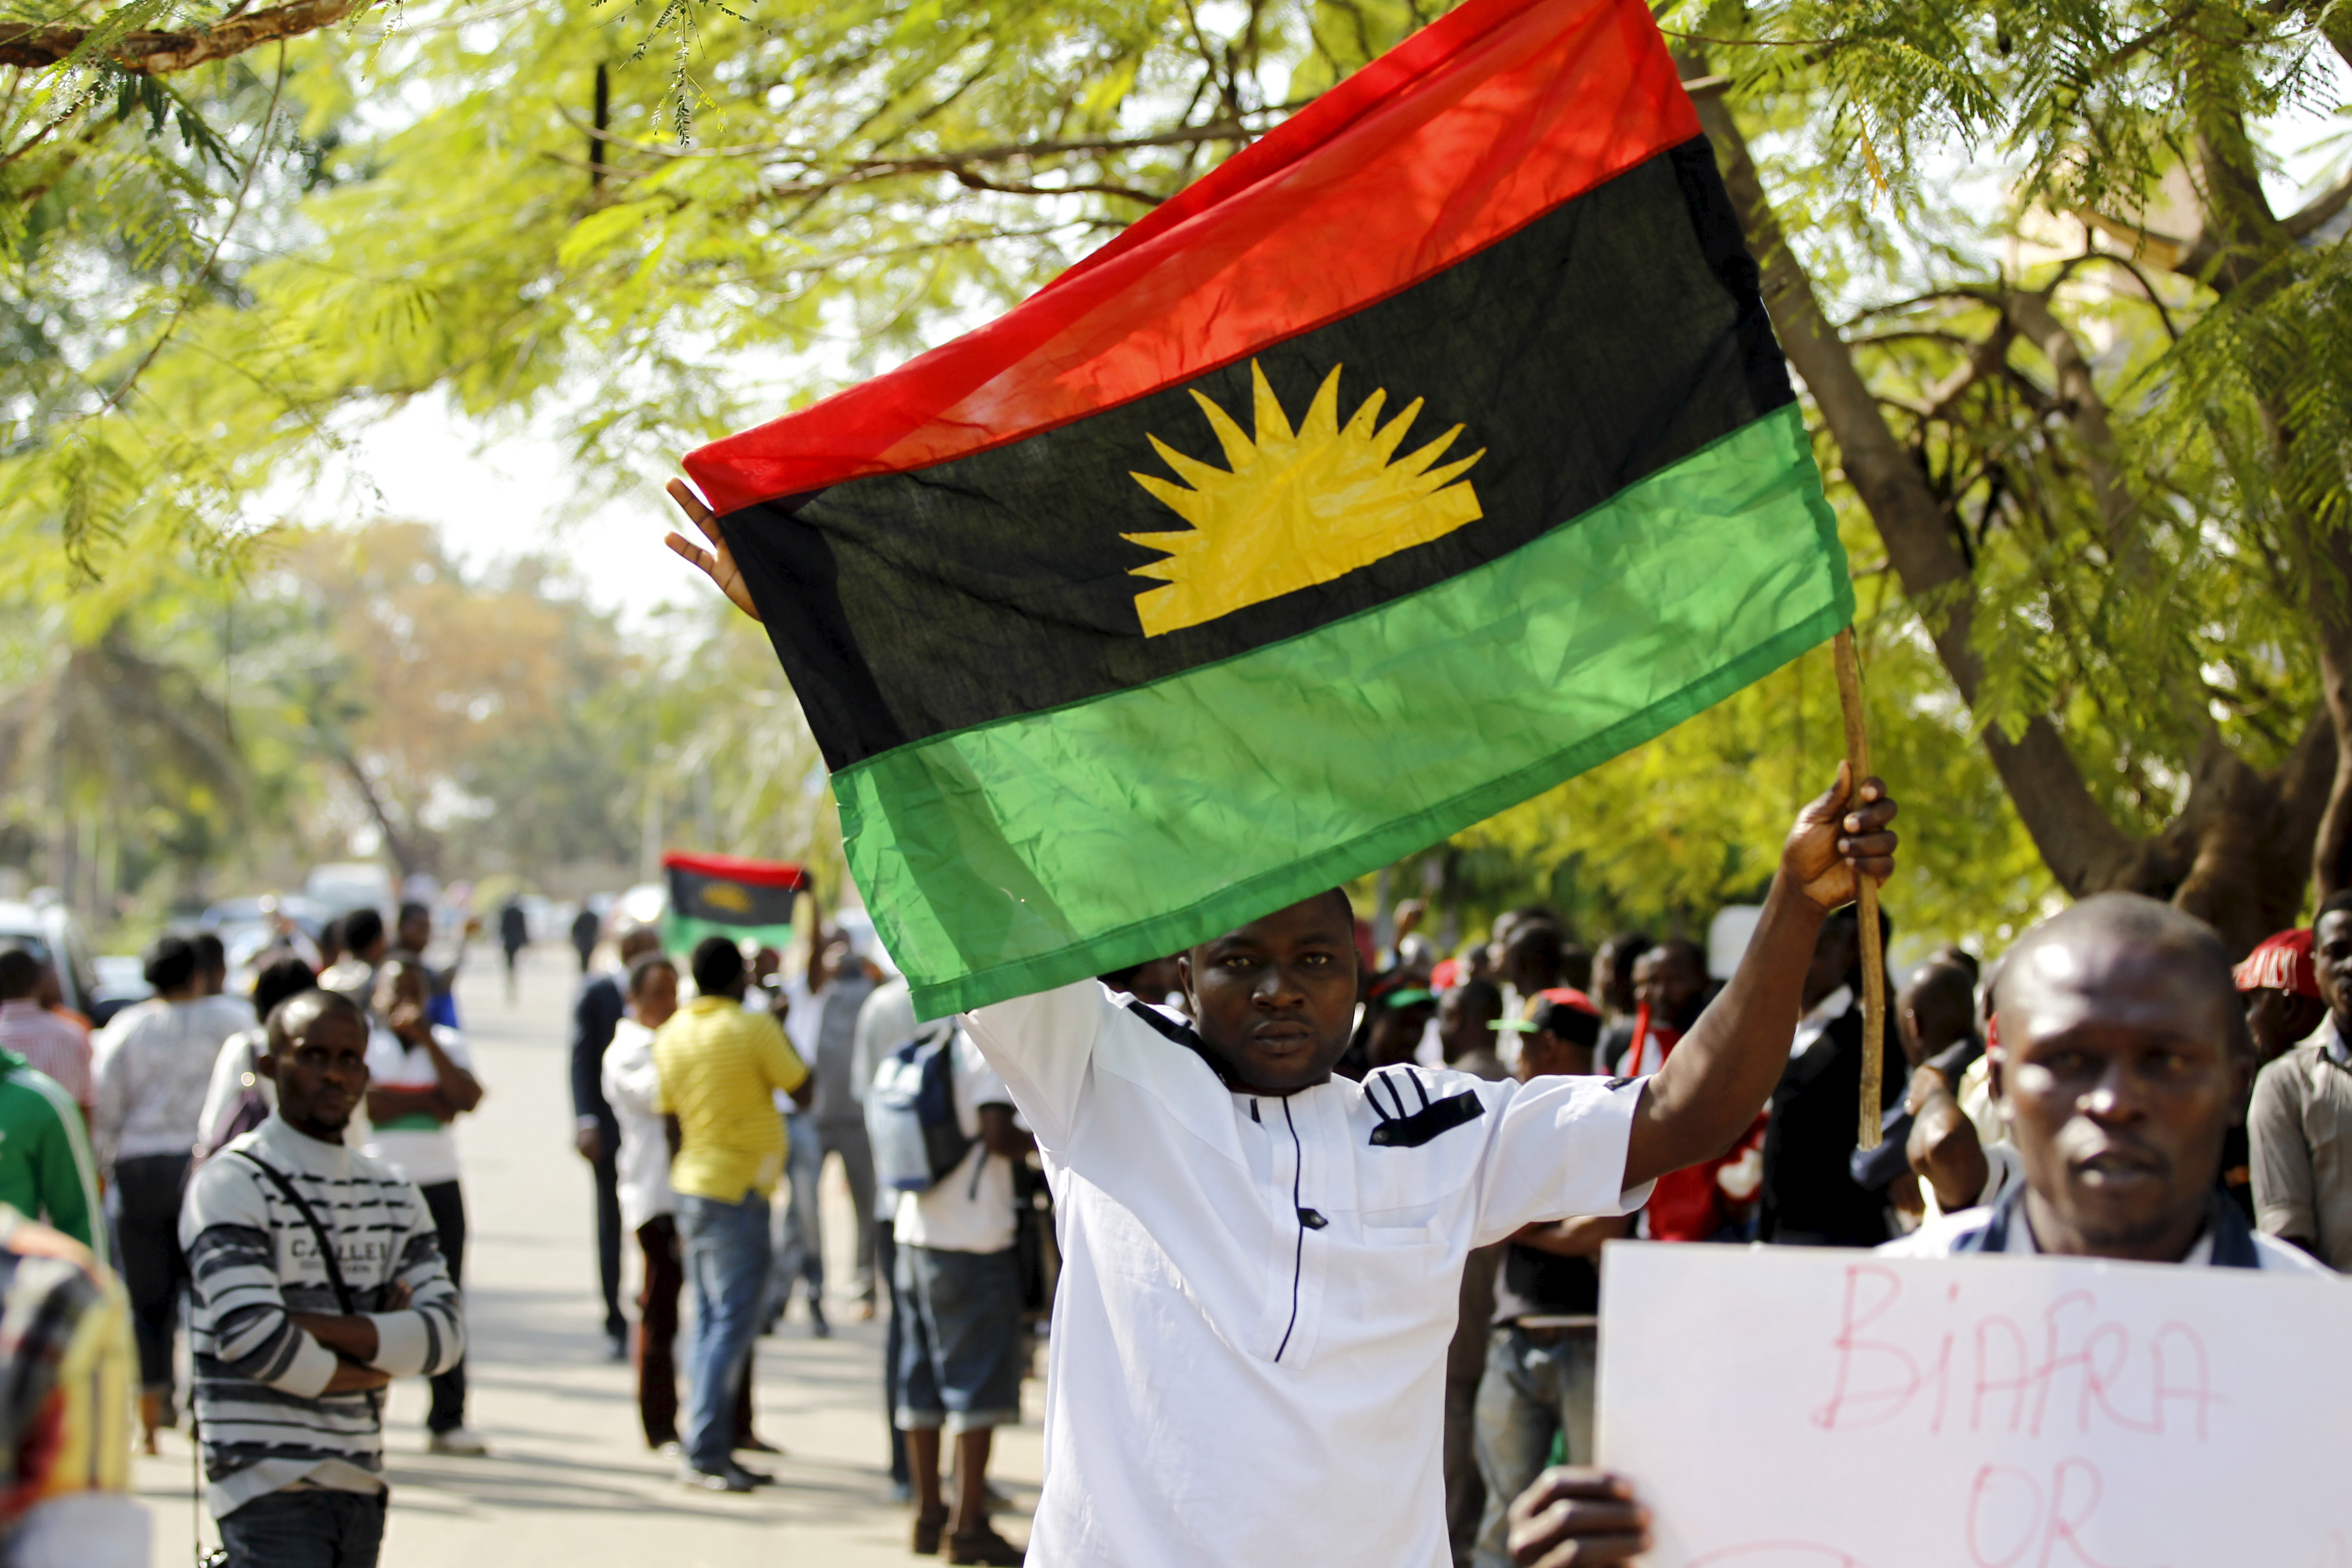 May 30: IPOB, MASSOB, pro-Biafra groups defy clampdown, insist on 52 years’ remembrance